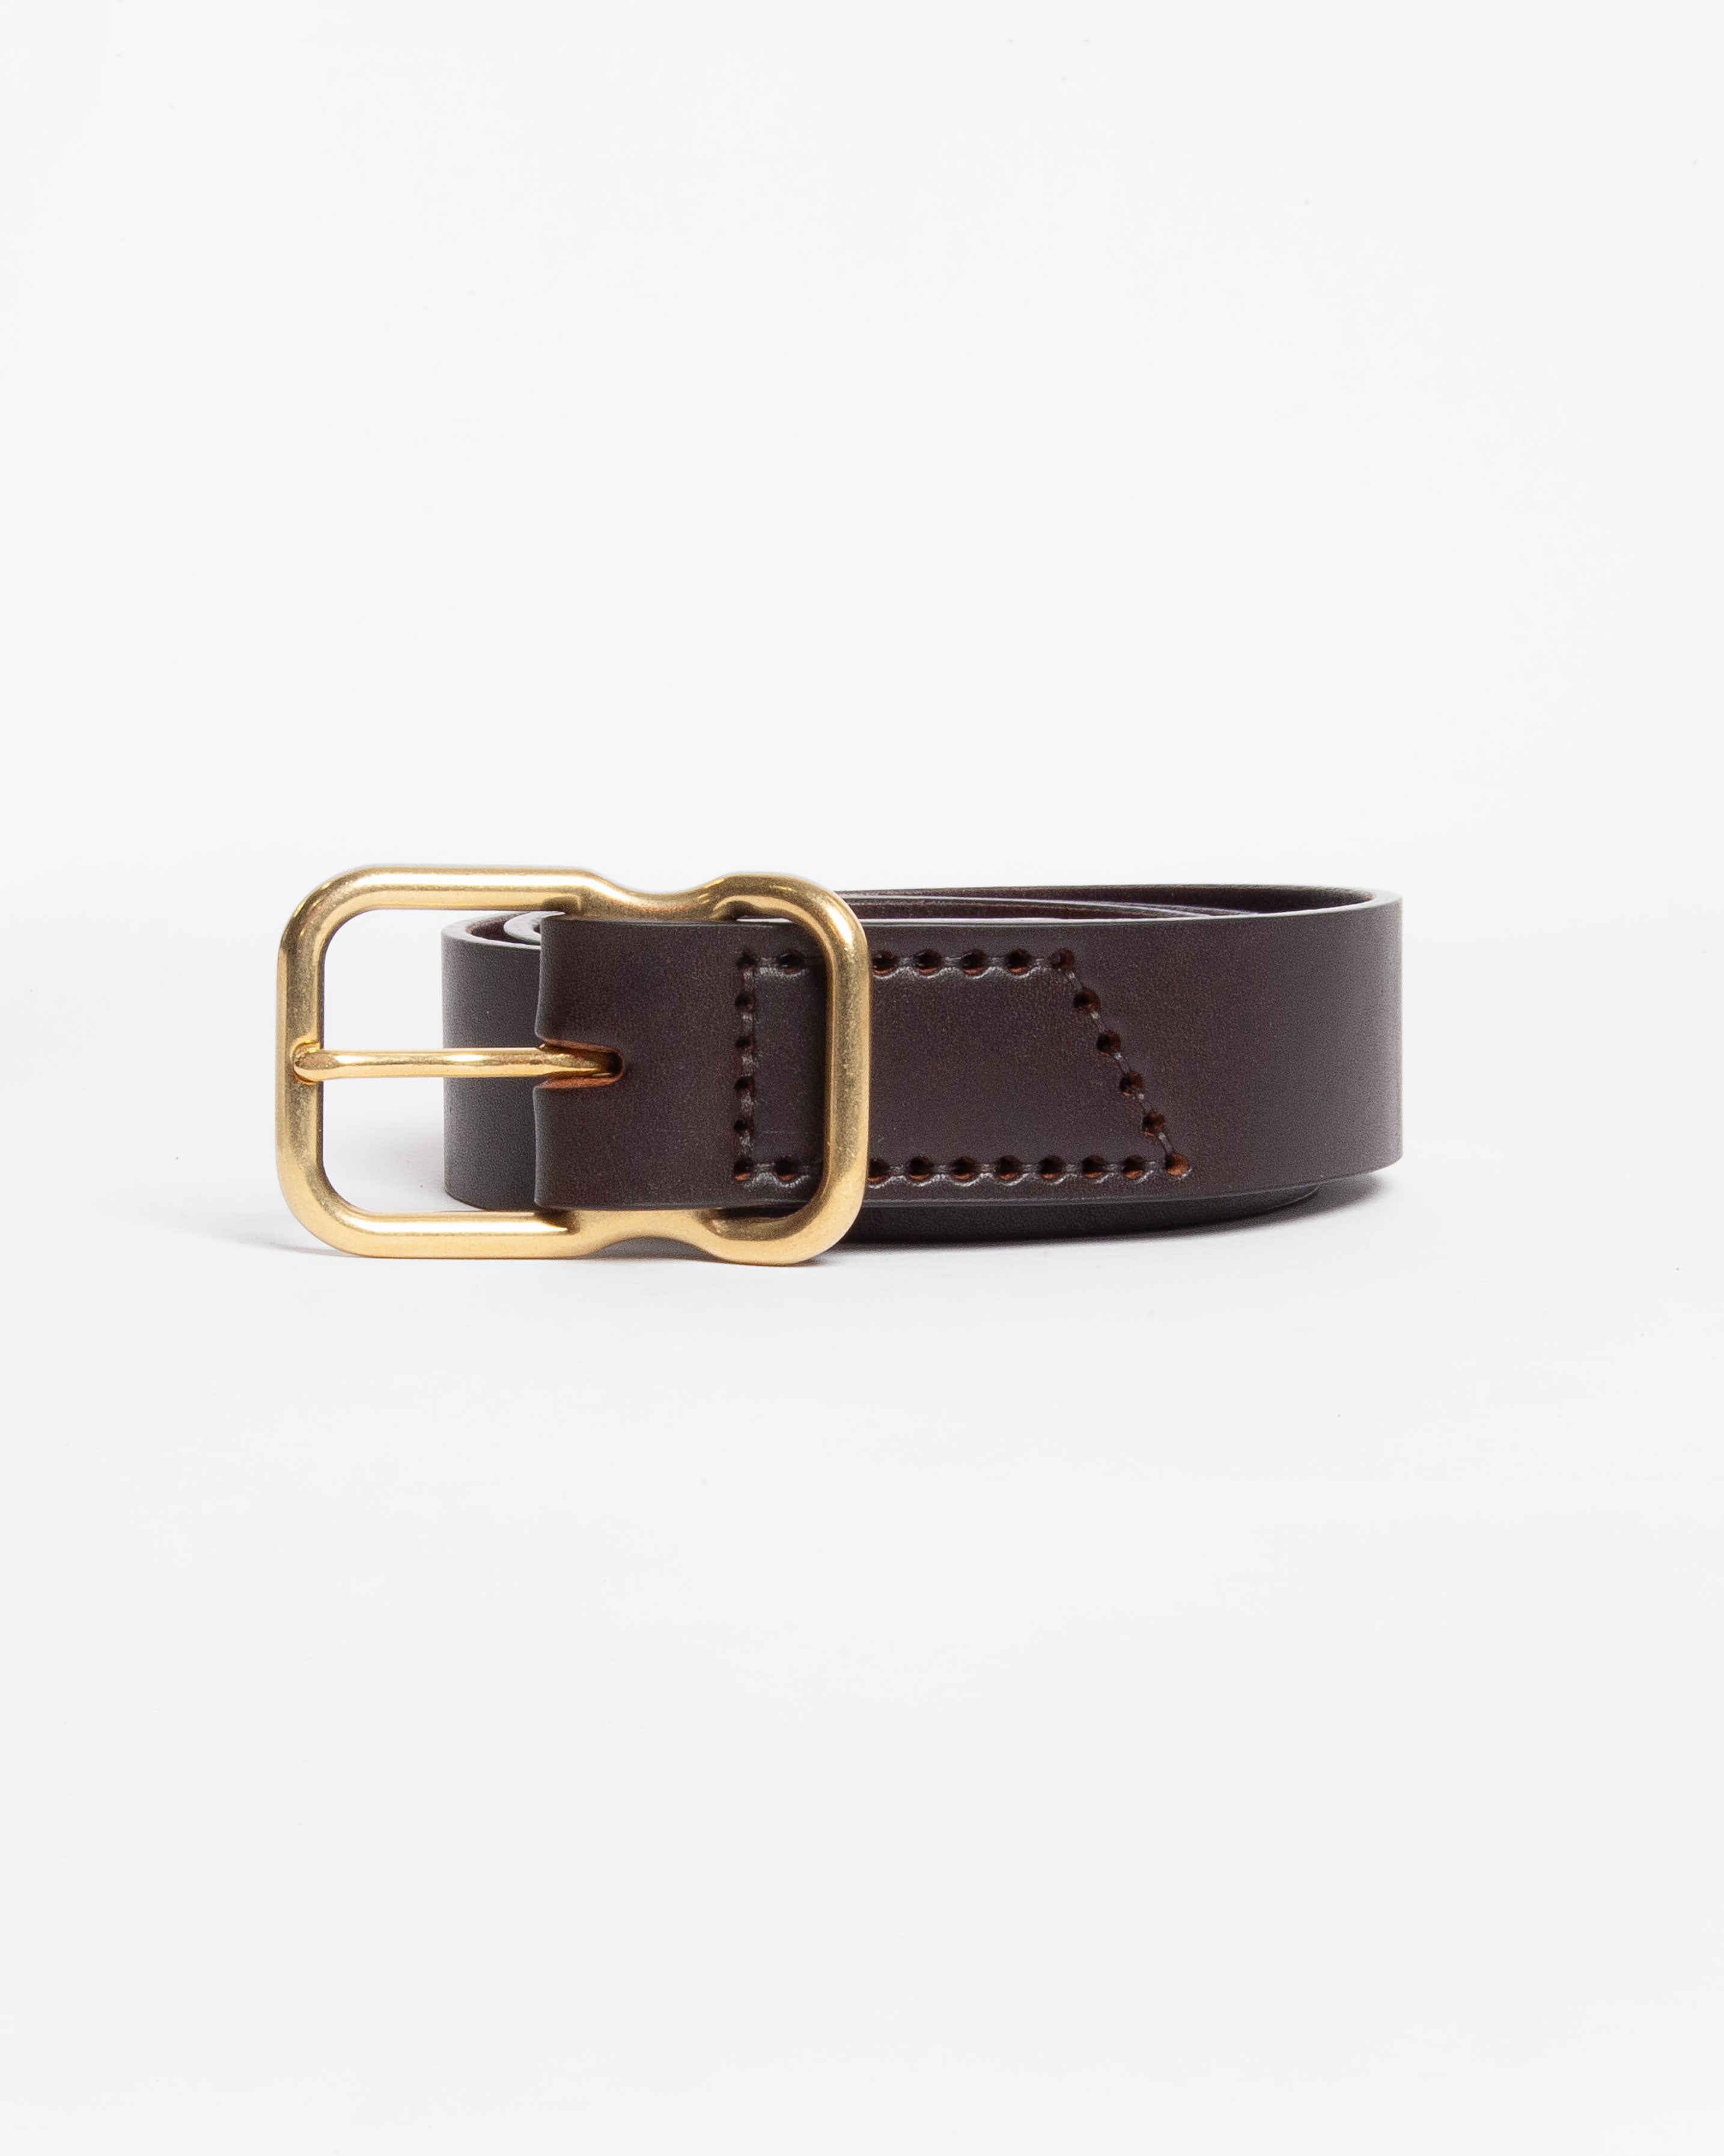 Brown Pebbled Leather Belt, Signature Buckle (Antique Brass)